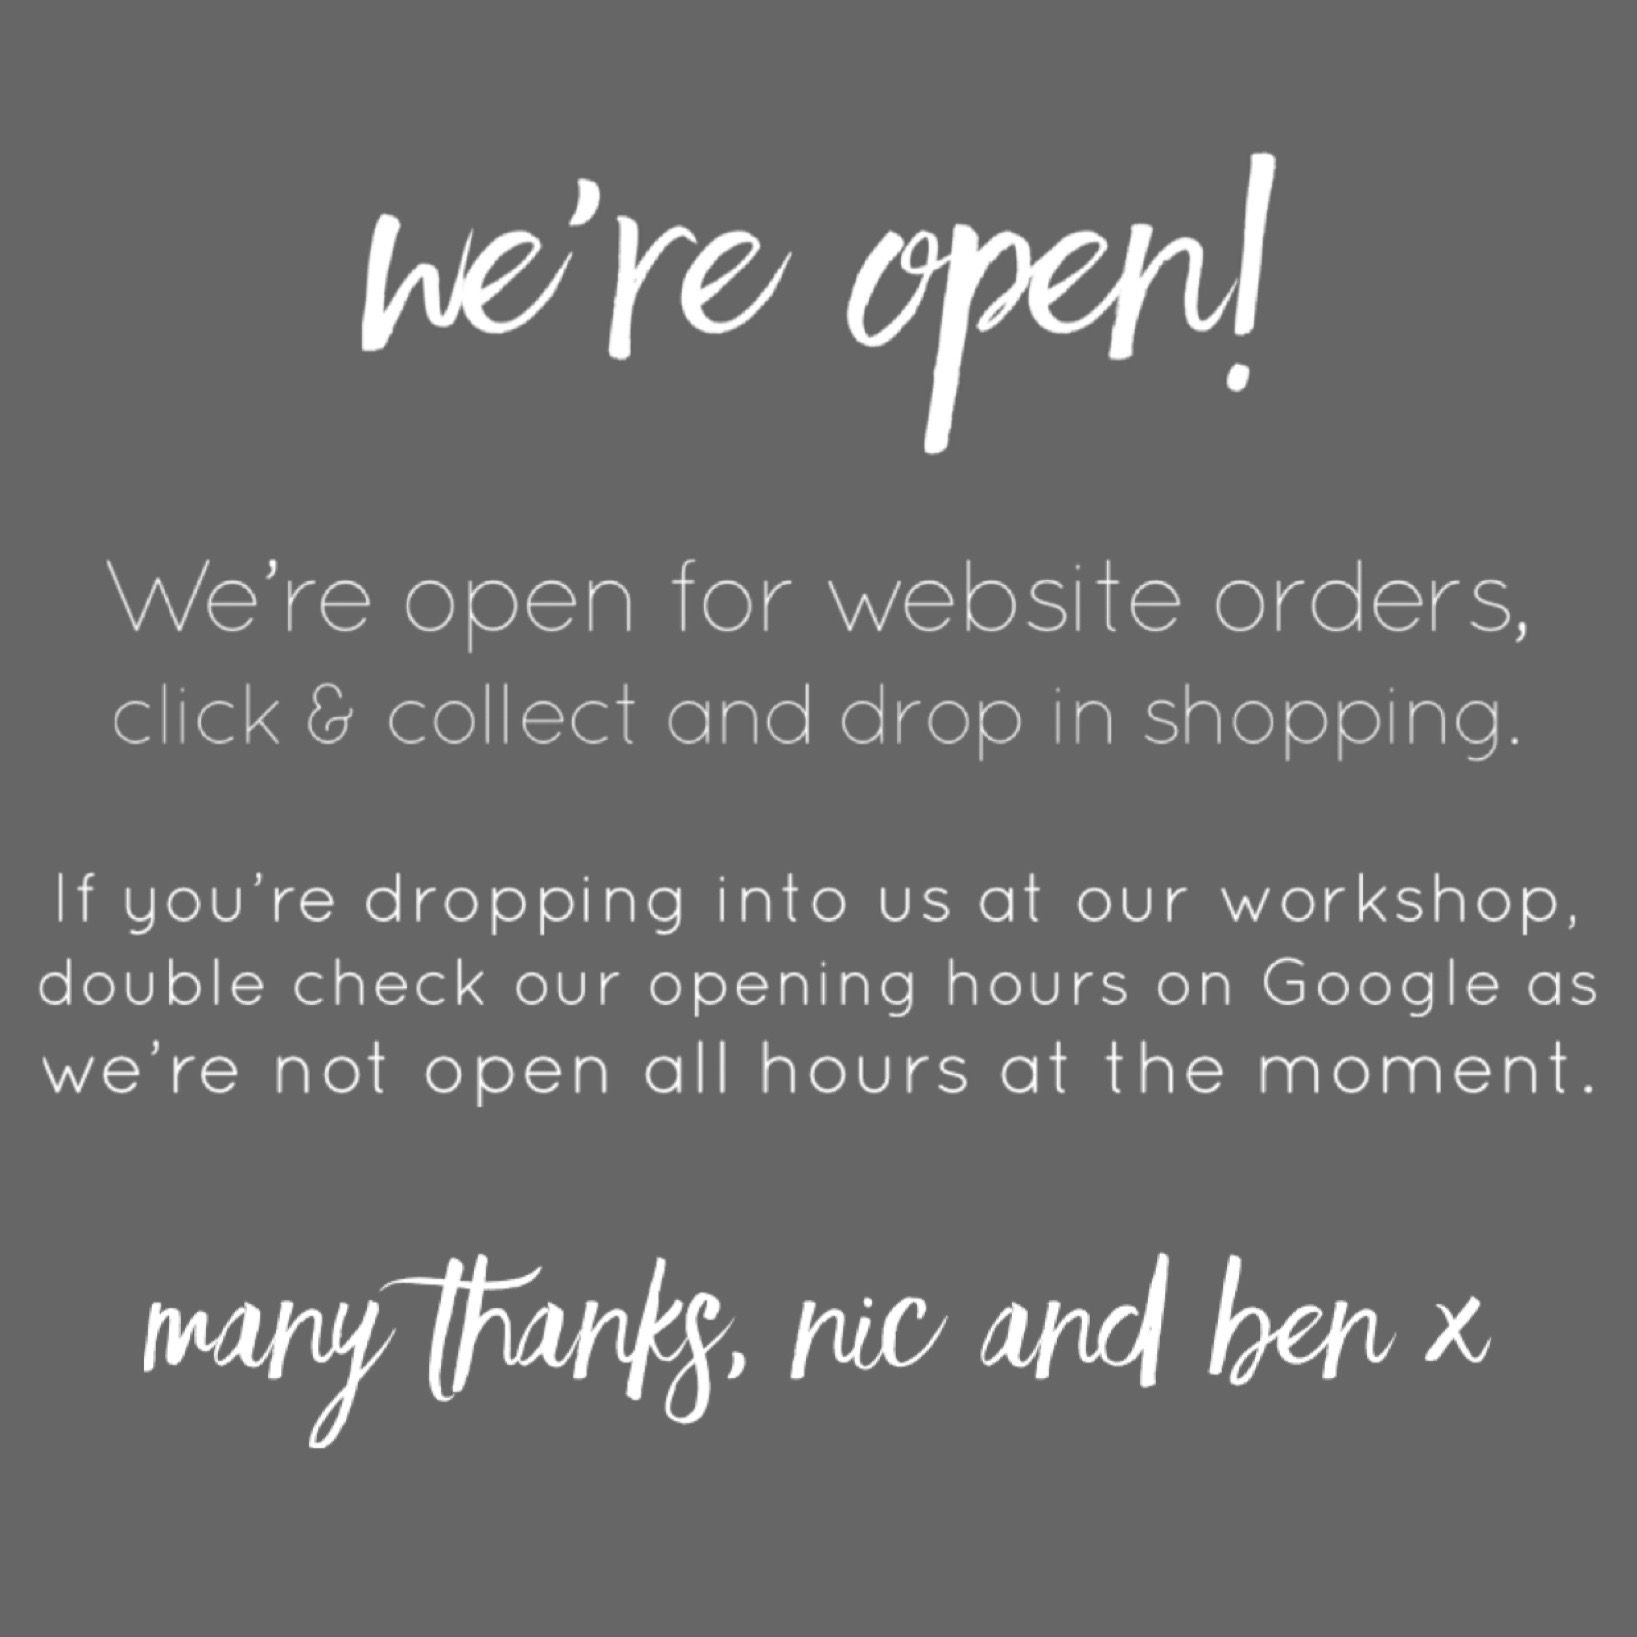 We're open for website orders, click & collect and drop in shopping. Please check our opening hours on Google before dropping into our workshop. Many thanks, Nic & Ben